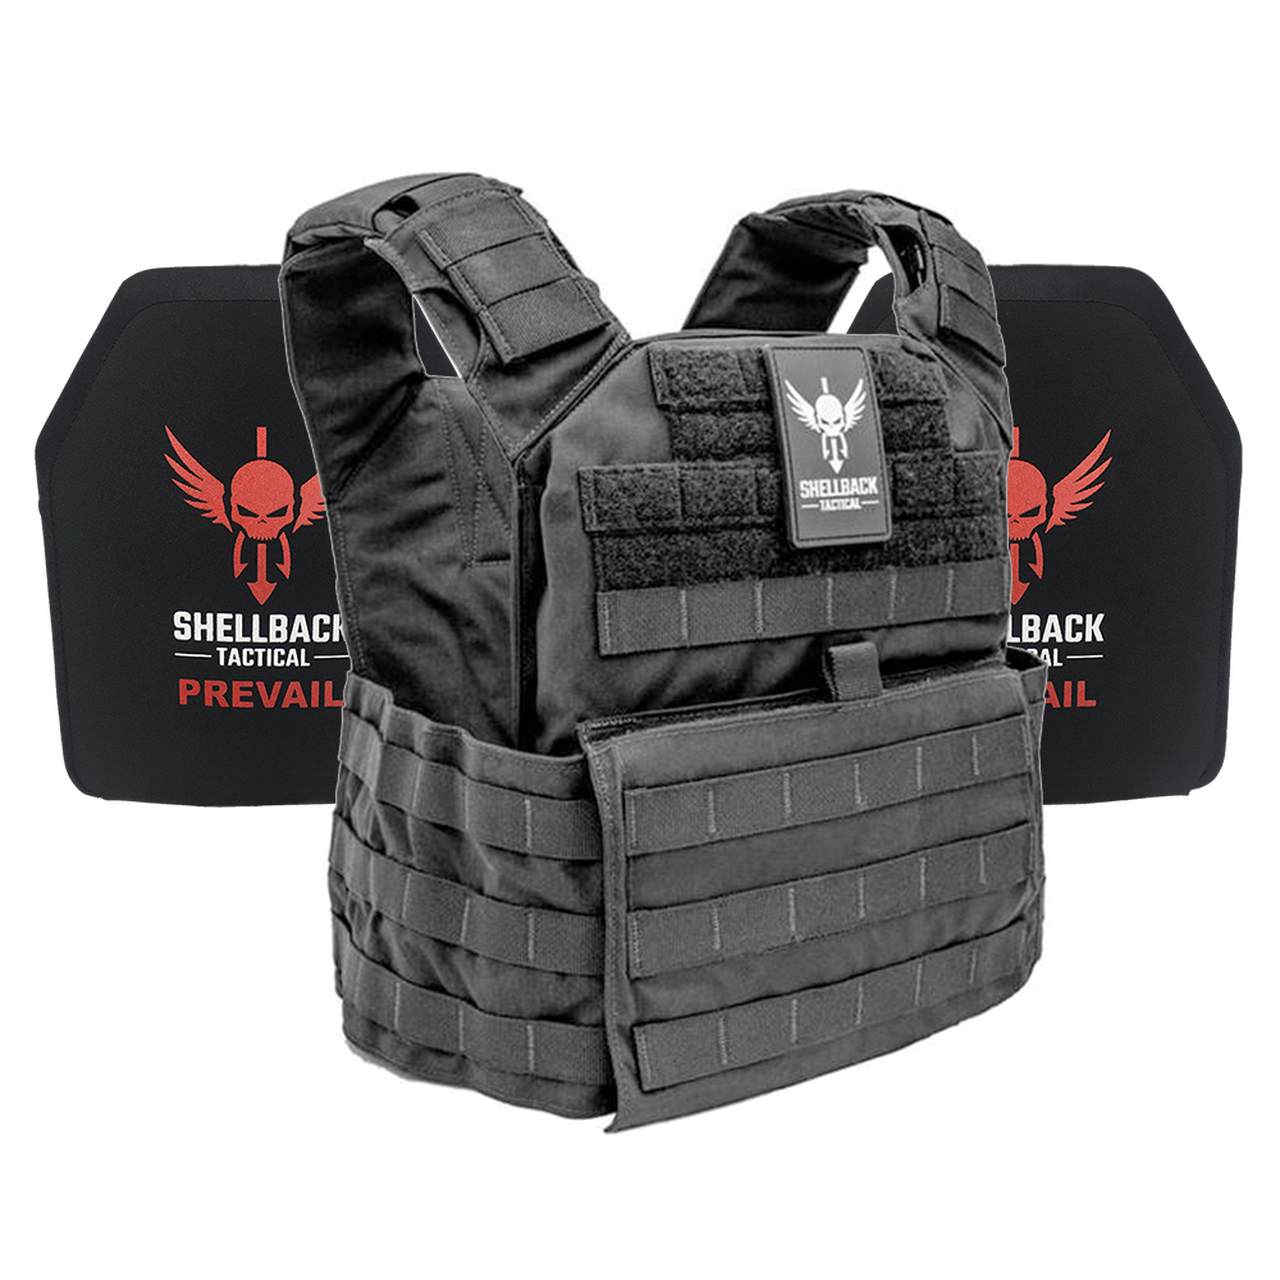 A Shellback Tactical Banshee Active Shooter Kit with Level IV Model 1155 Armor Plates vest with a red and black logo on it.